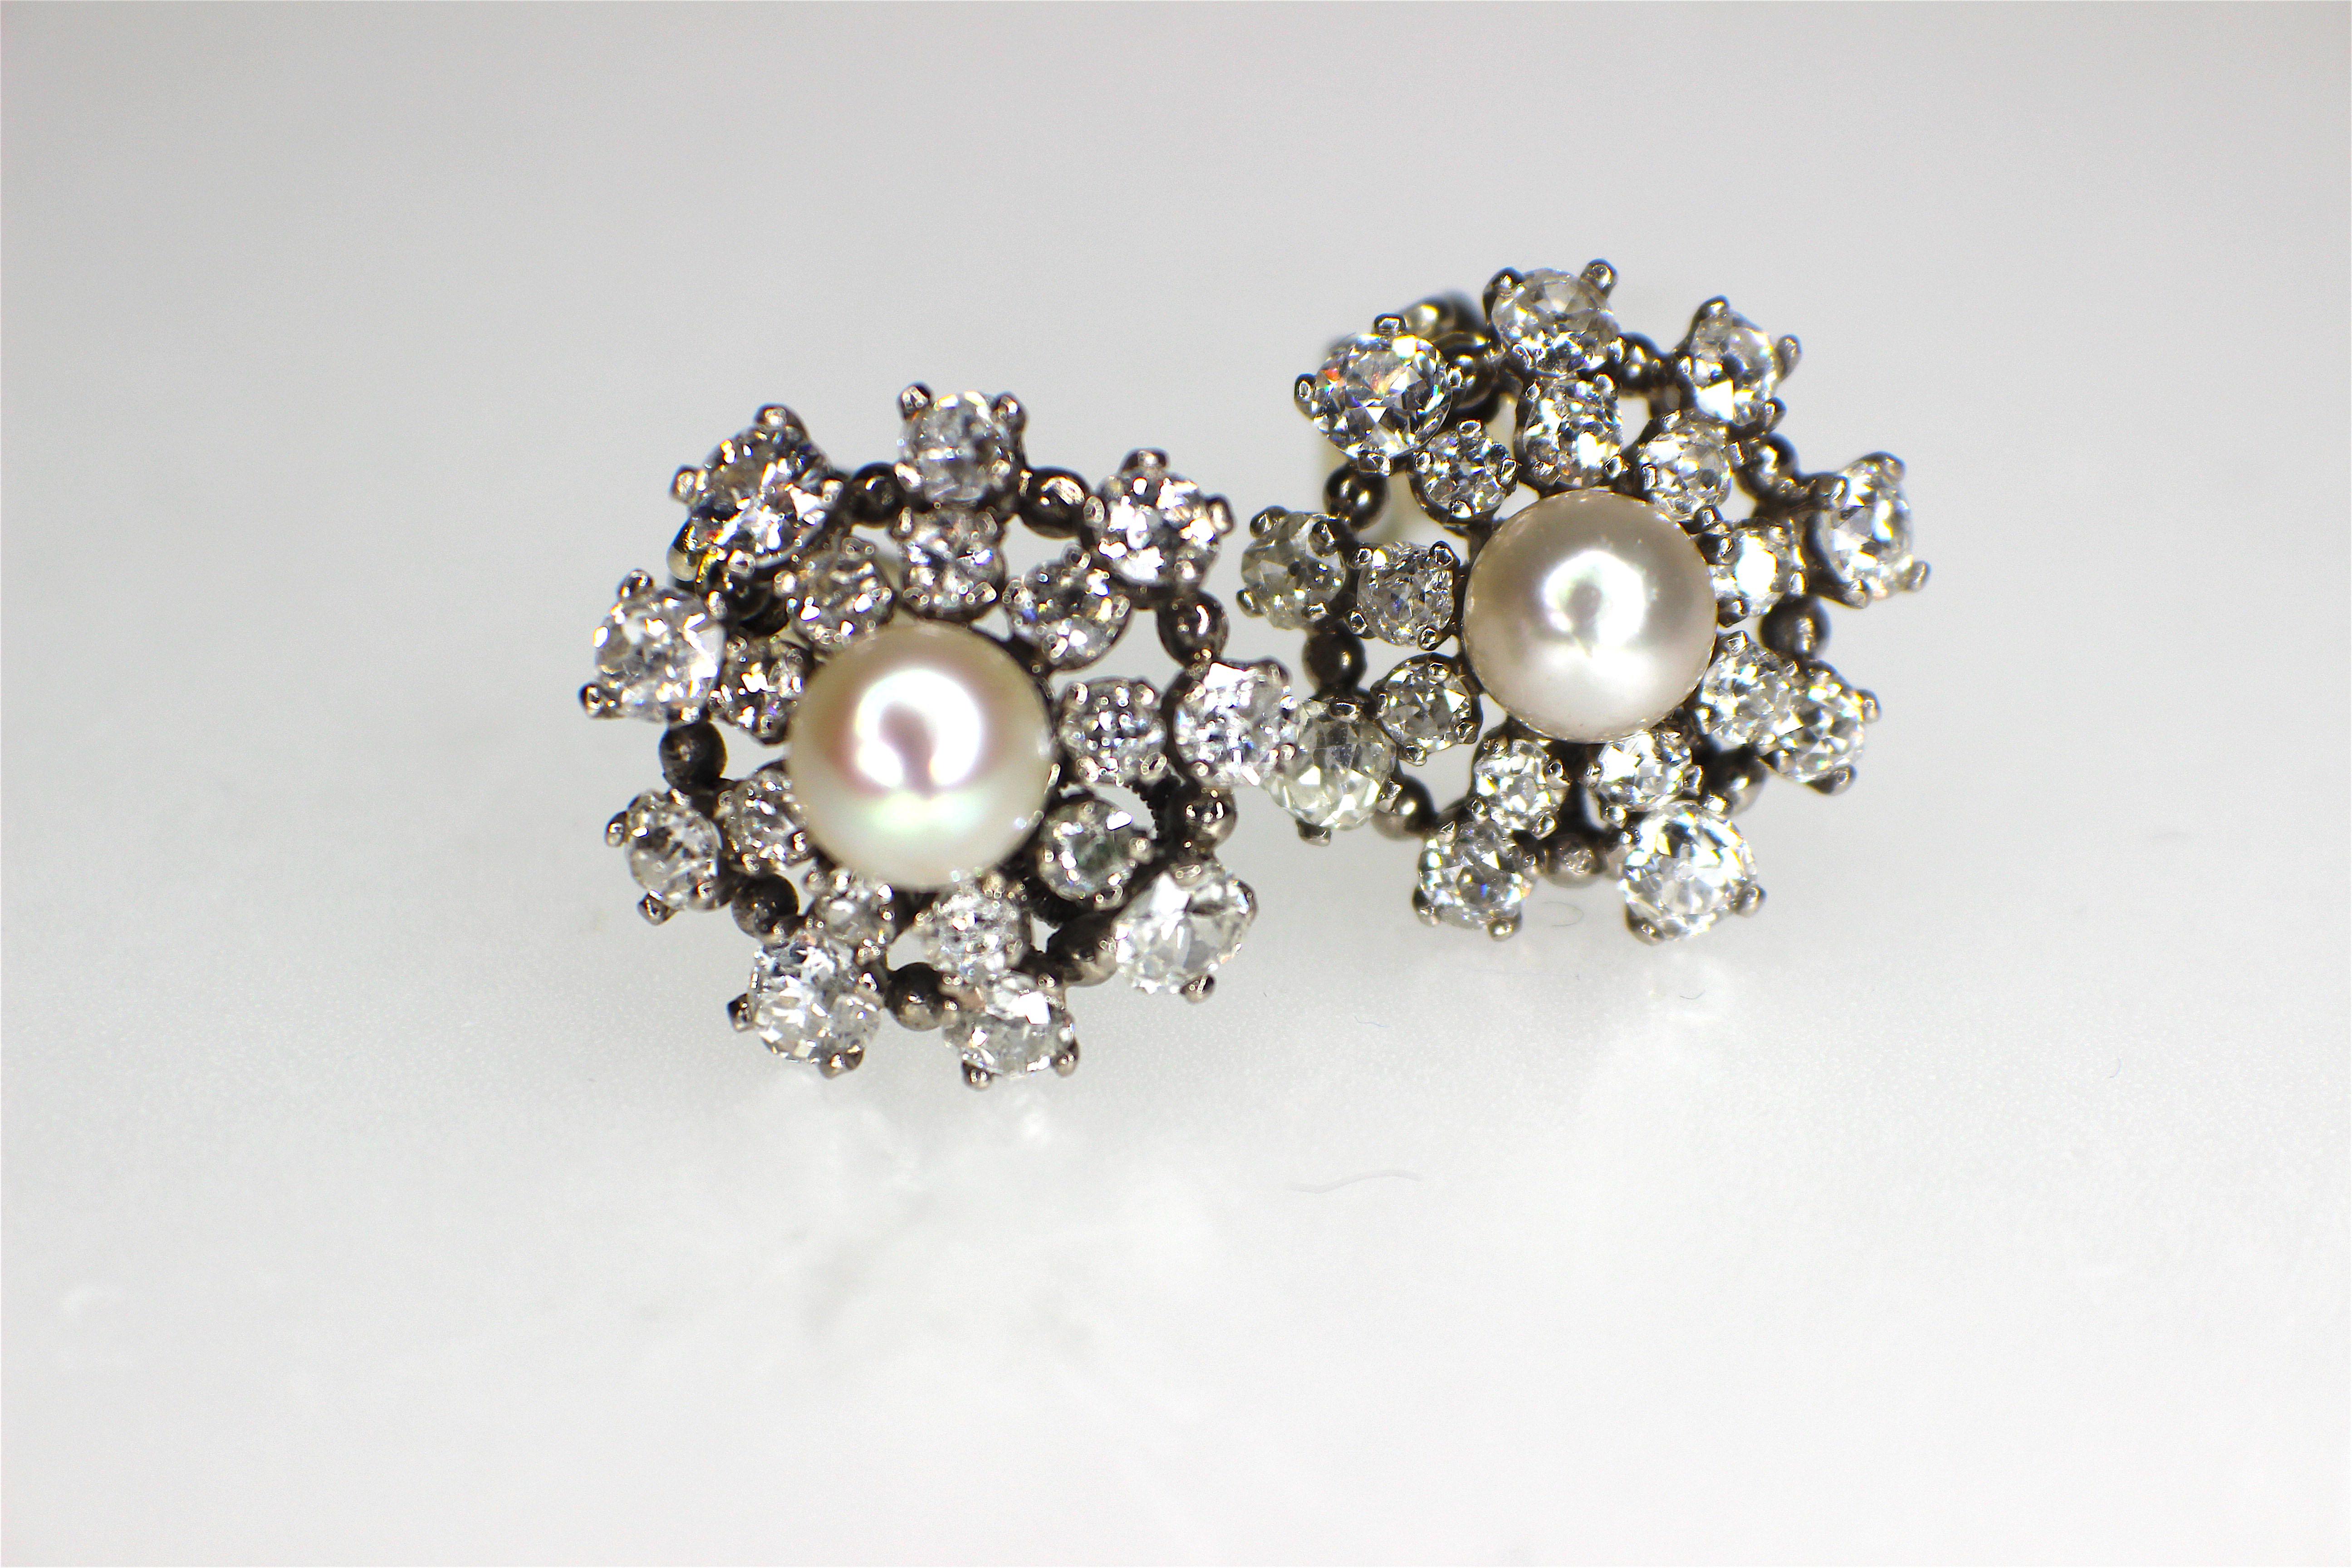 A natural pearl and diamond pair of earrings set in platinum, circa 1950´s. Pearl report #10975, stated that the pearls are natural saltwater pearls measuring : 7.0x6.2mm and 6.8-6.9x6.2mm